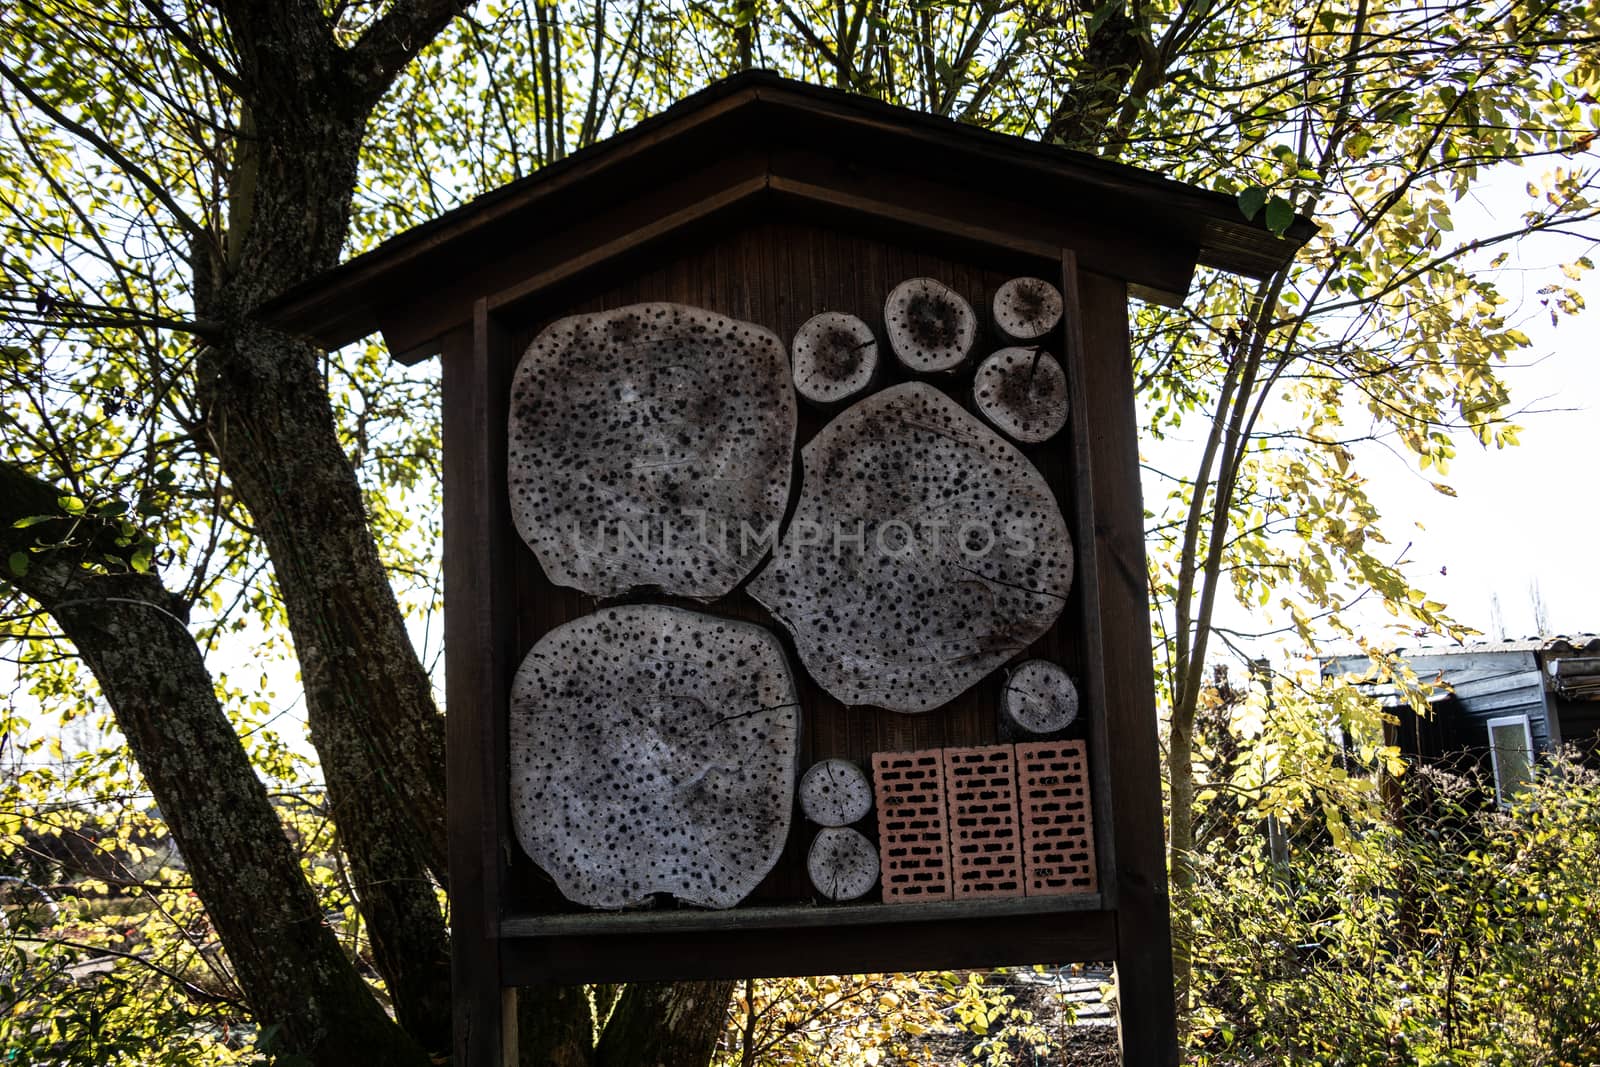 Insect hotel in the garden as a nesting aid for insects